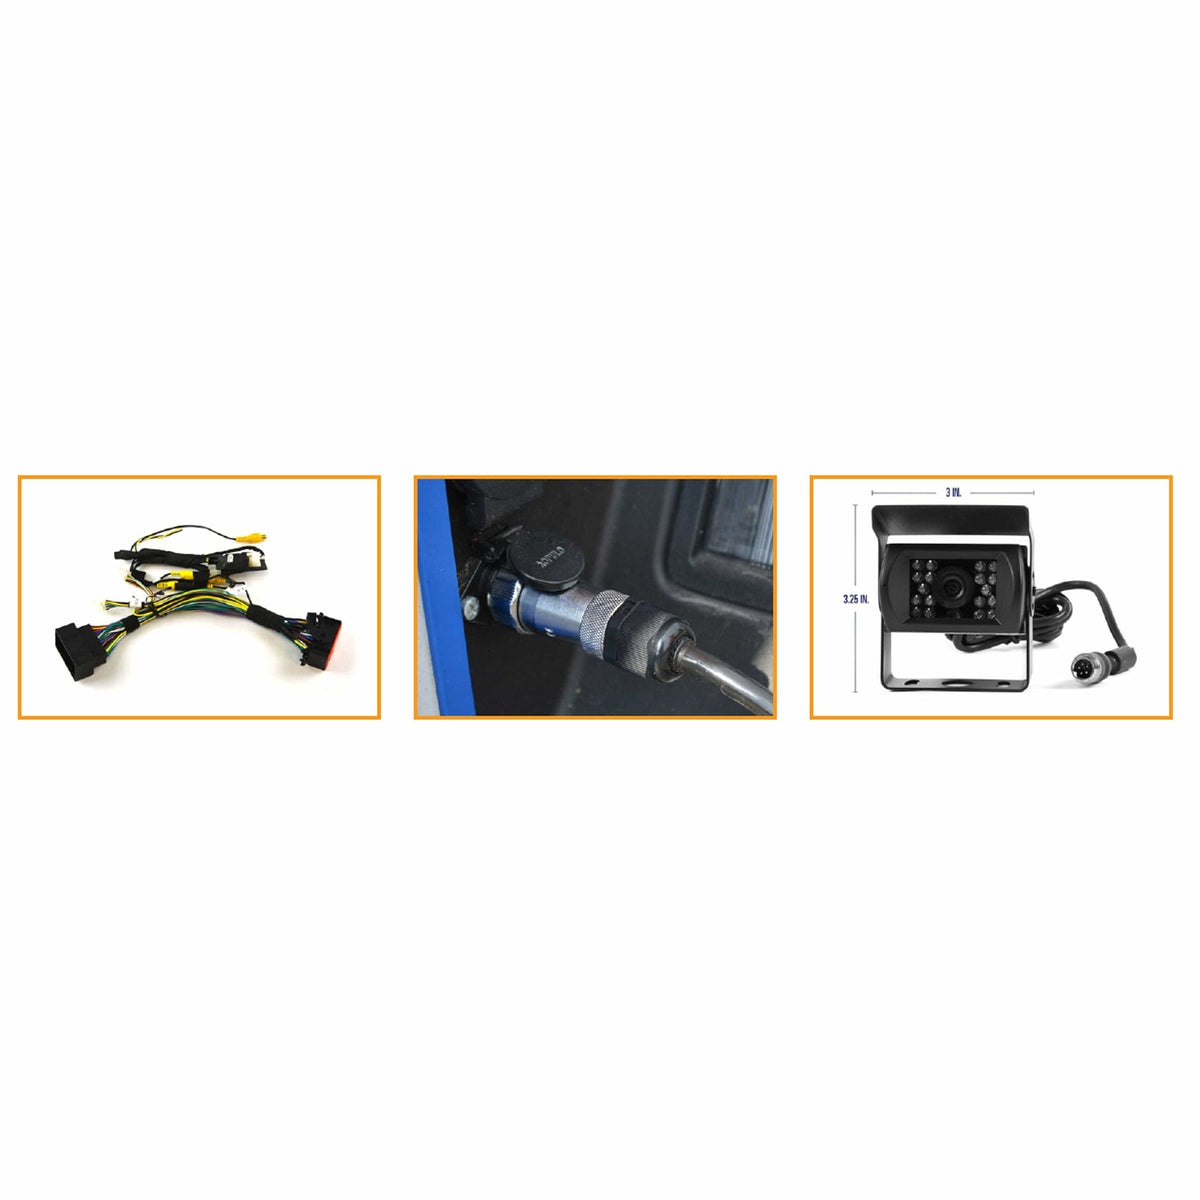 Brandmotion Qualifies for Free Shipping Brandmotion Trailer Rear Vision Kit FCA 8.4" or 5" Display #9002-7806